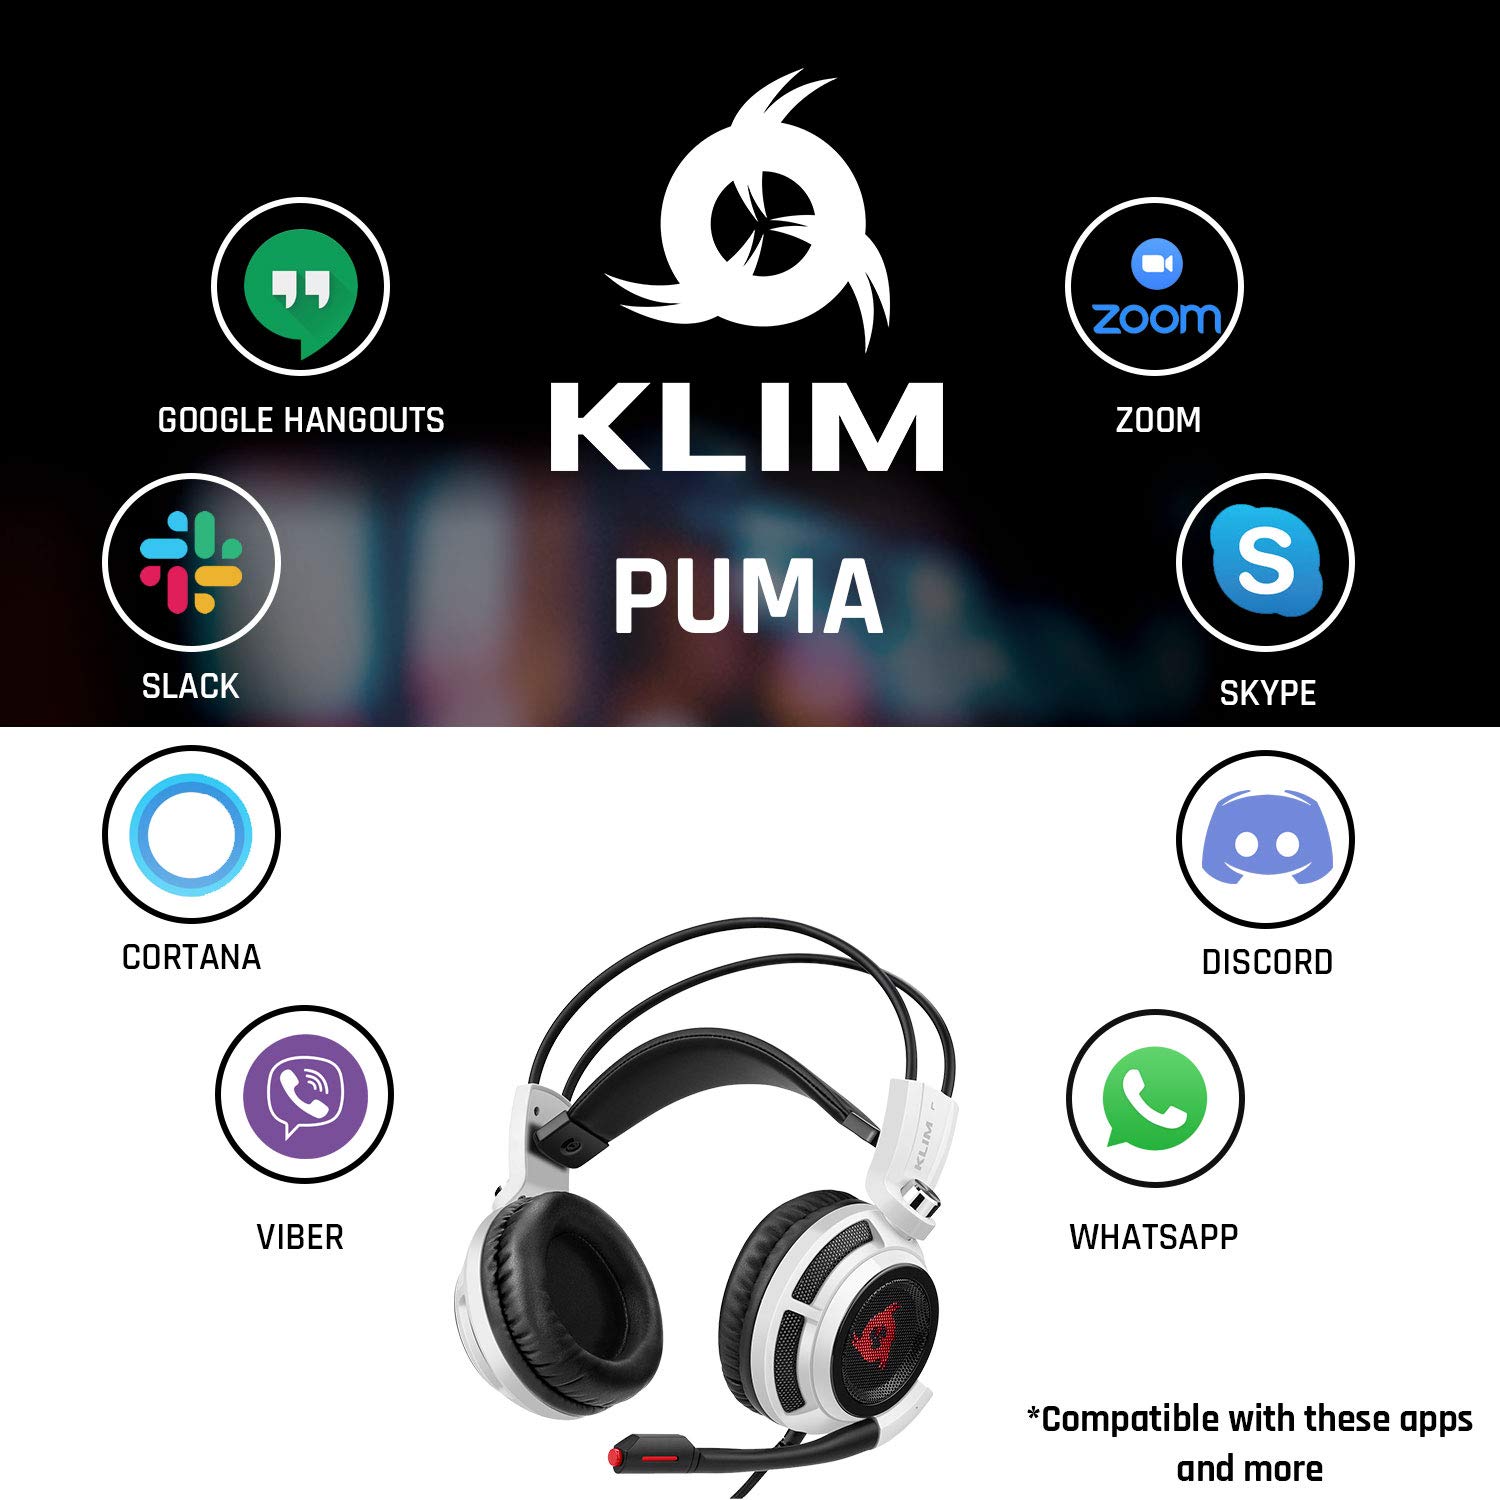 Klim Puma - USB Gamer Headset with Mic - 7.1 Surround Sound Audio - Integrated Vibrations - Perfect for PC and PS4 Gaming - New 2022 Version - White